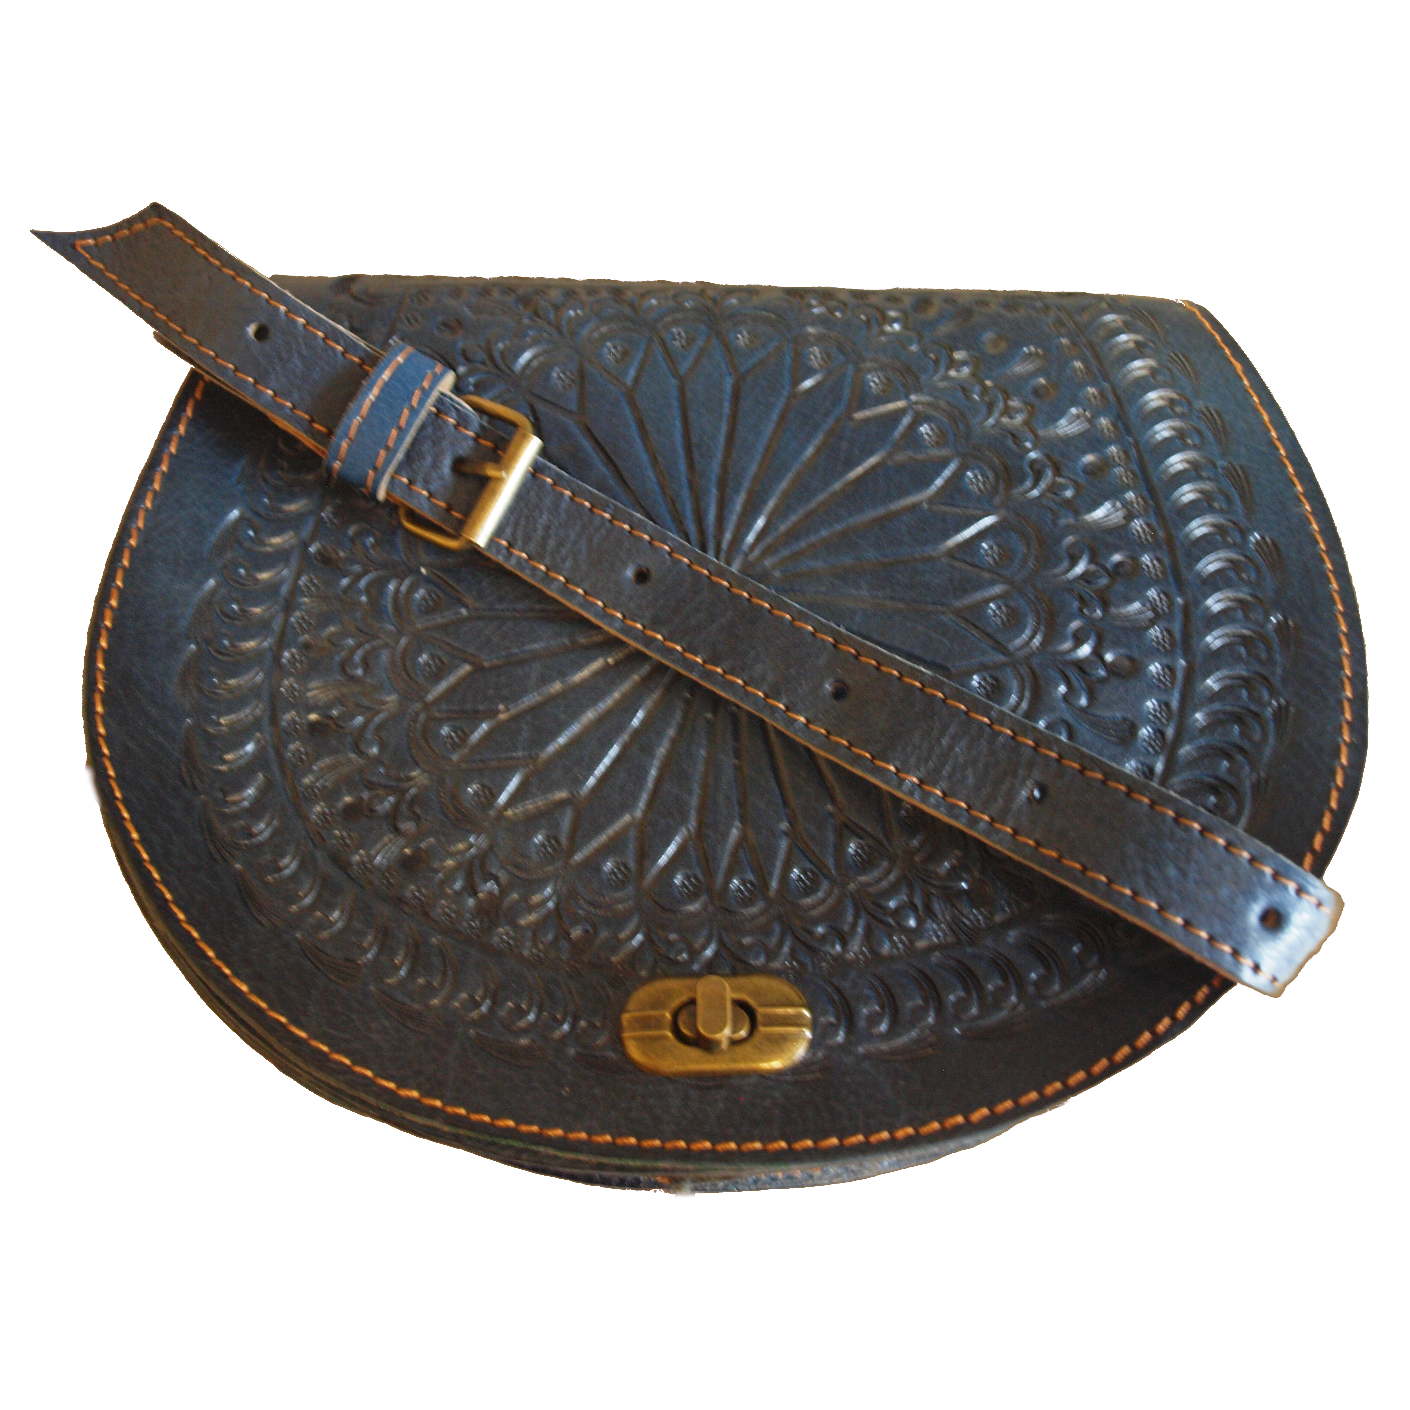 The Temara Embossed Saddle Bag in Navy Blue on White Background